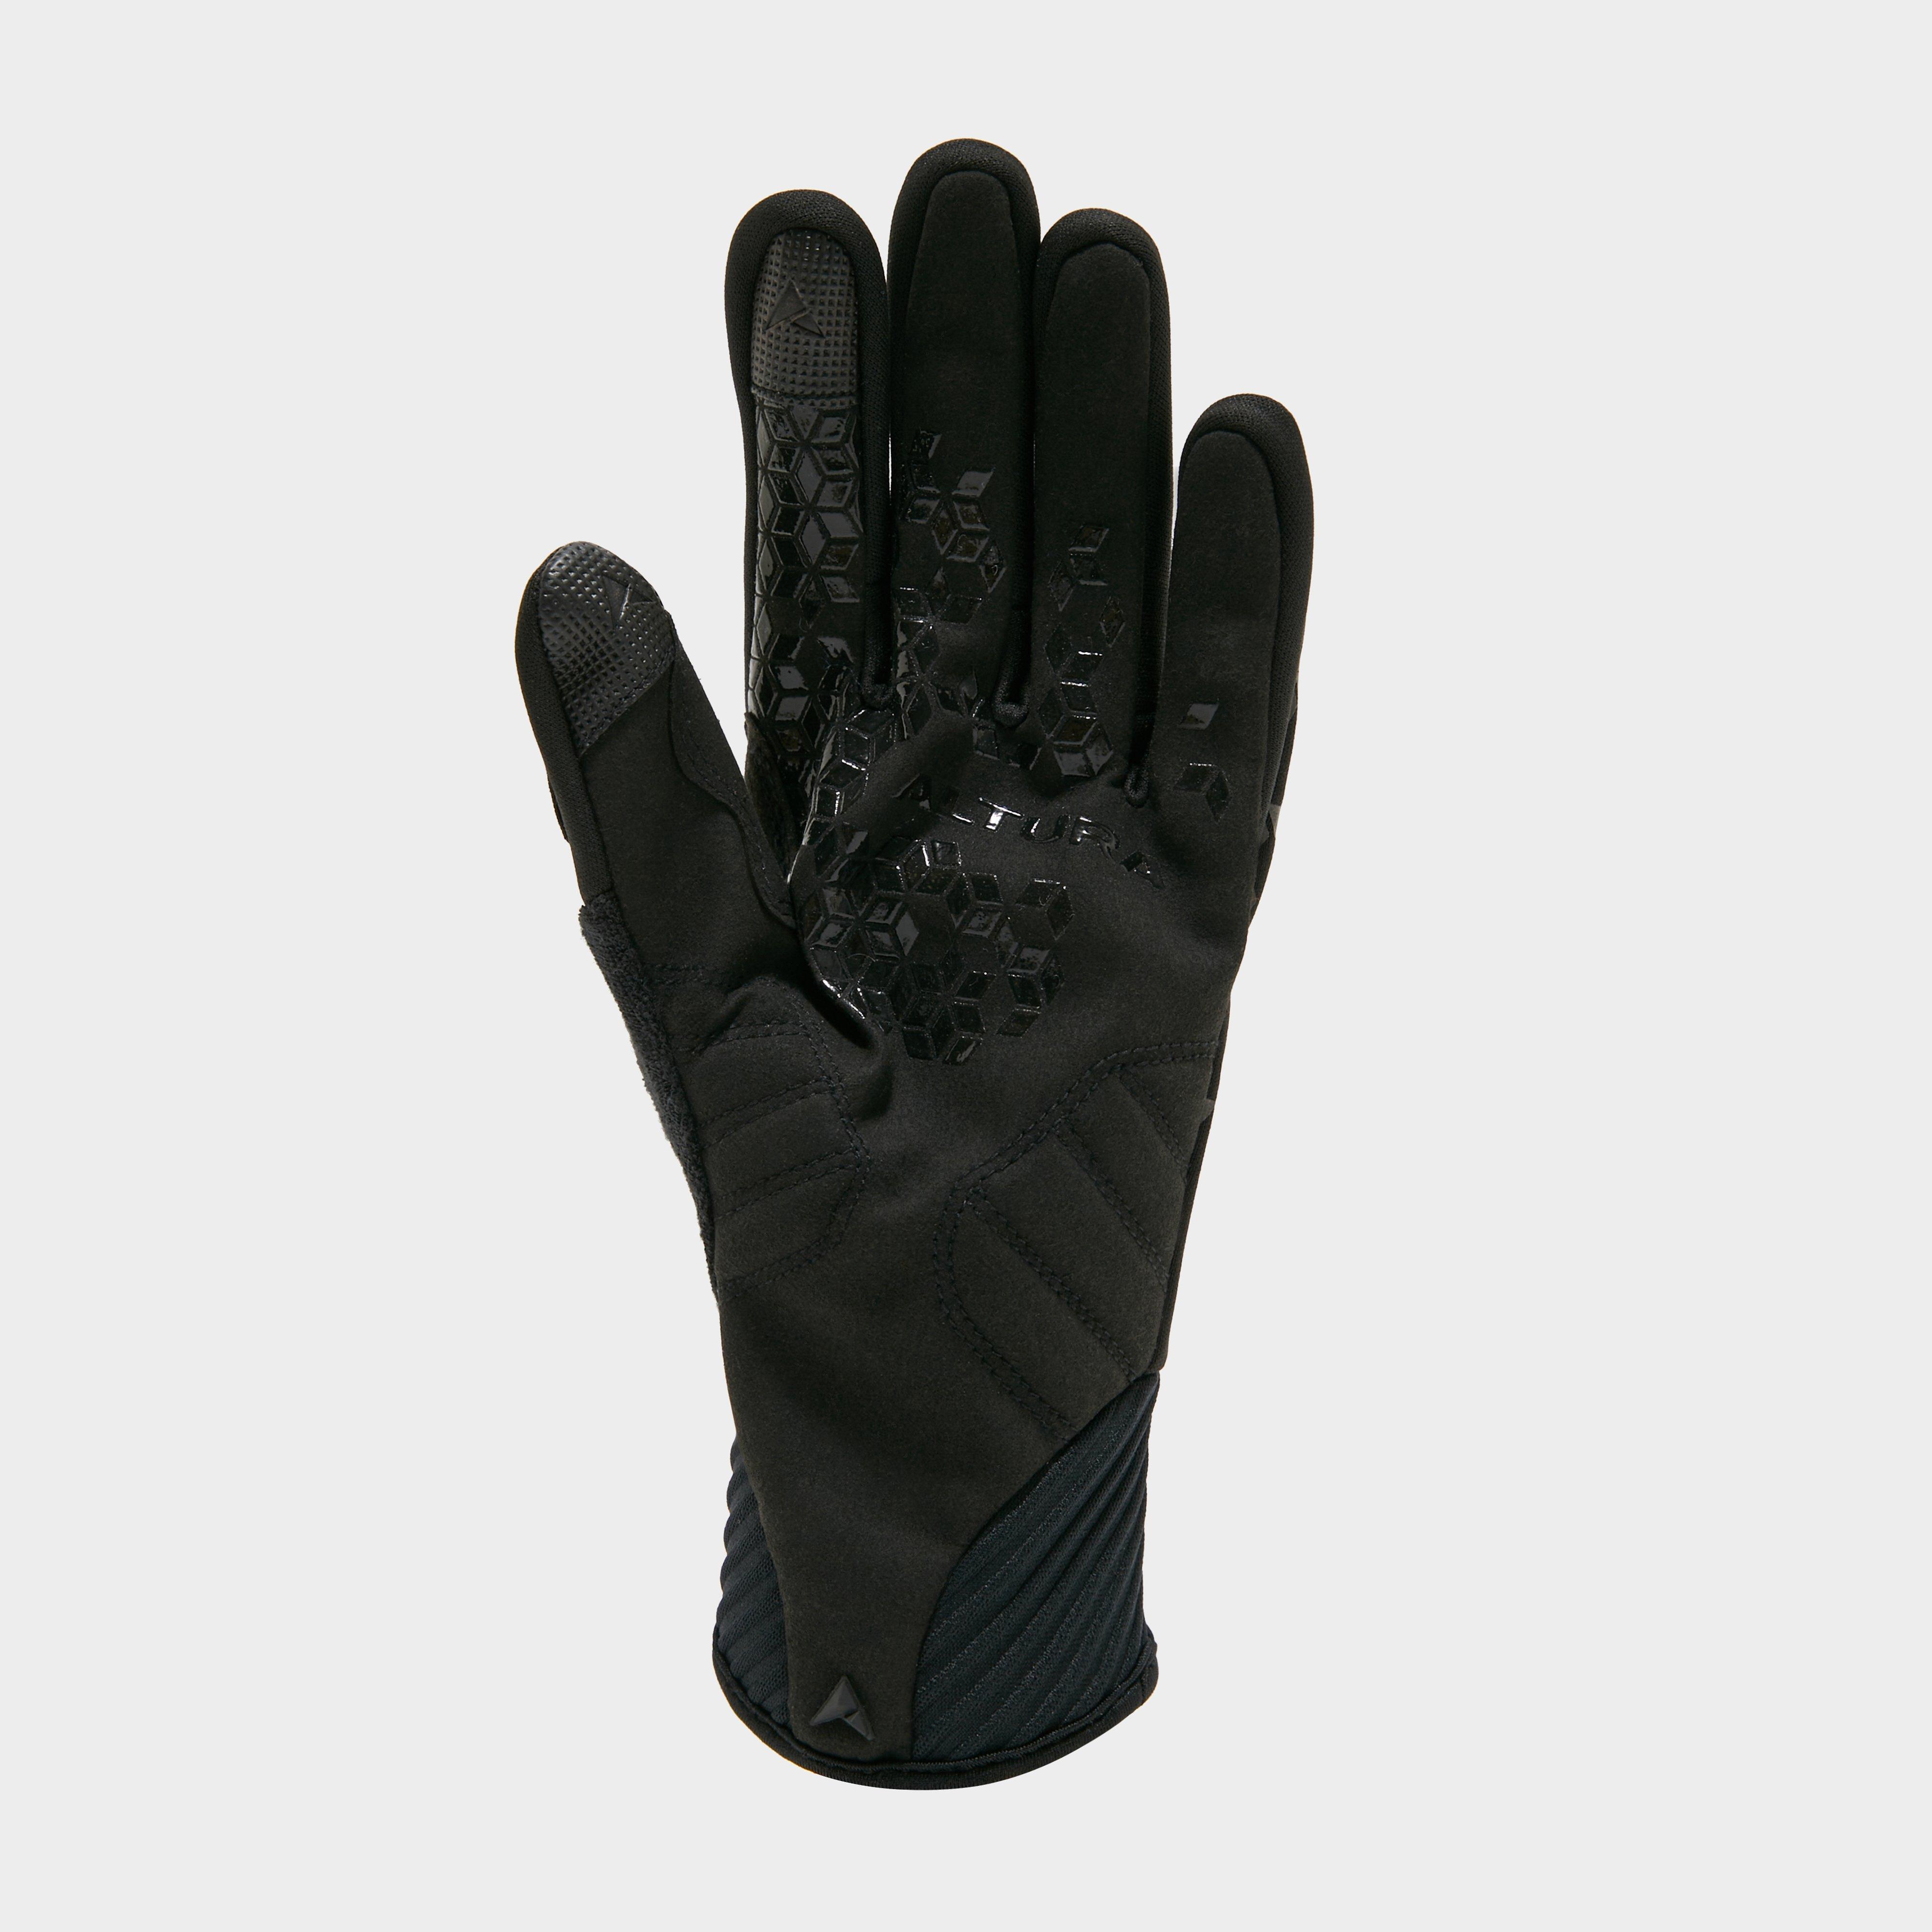 Altura Nightvision Windproof Cycling Glove Review